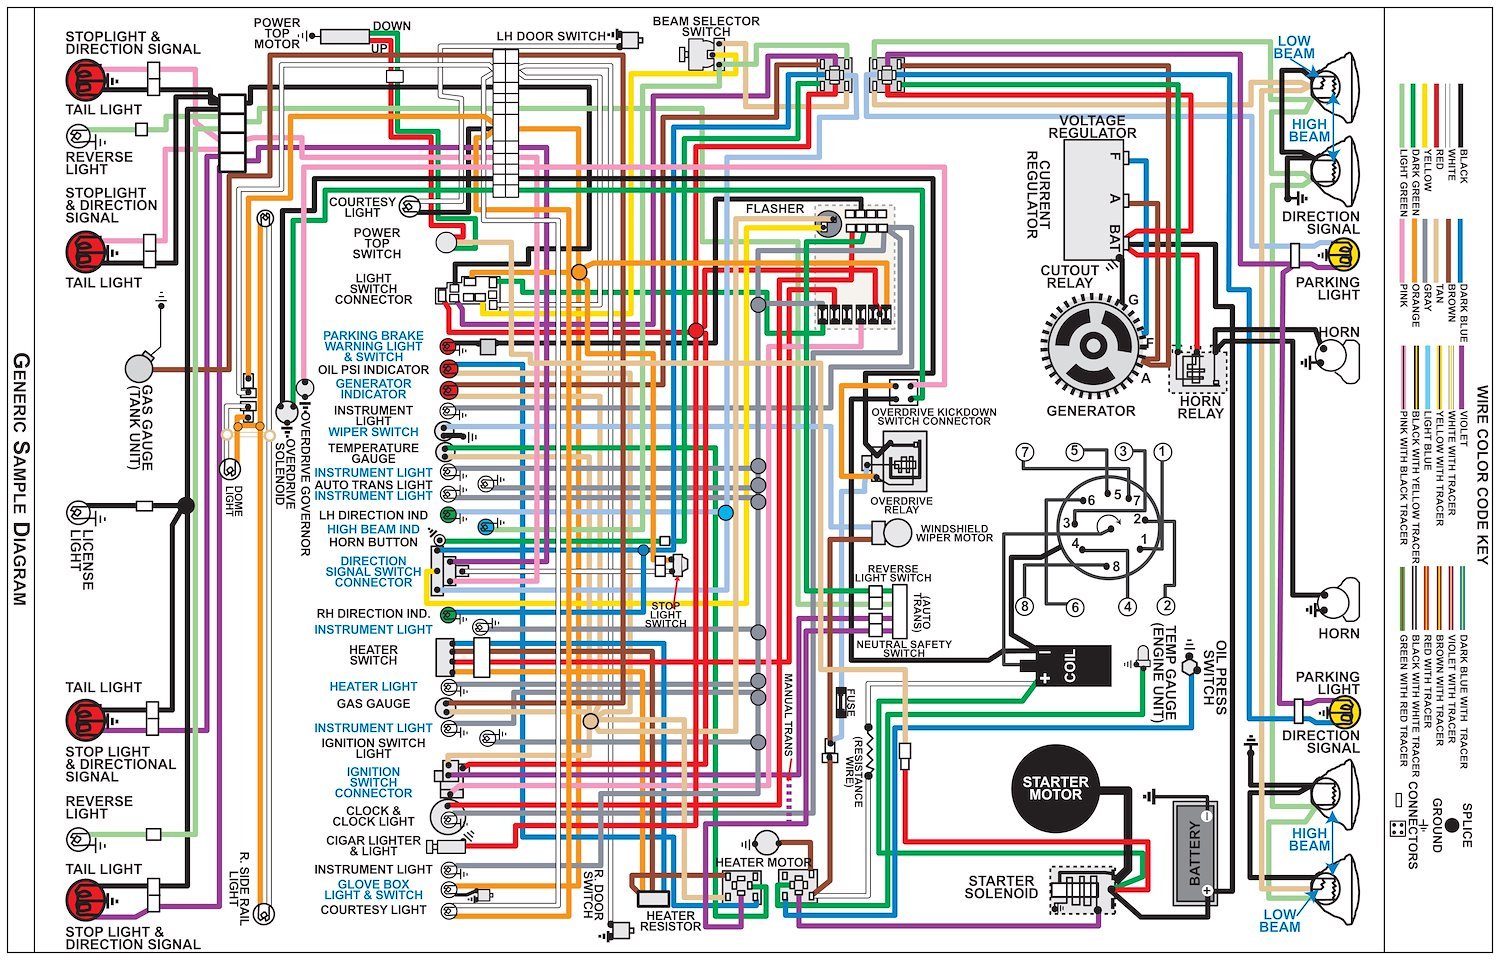 Wiring Diagram for 1971 Pontiac Full Size Cars, 11 in. x 17 in., Laminated